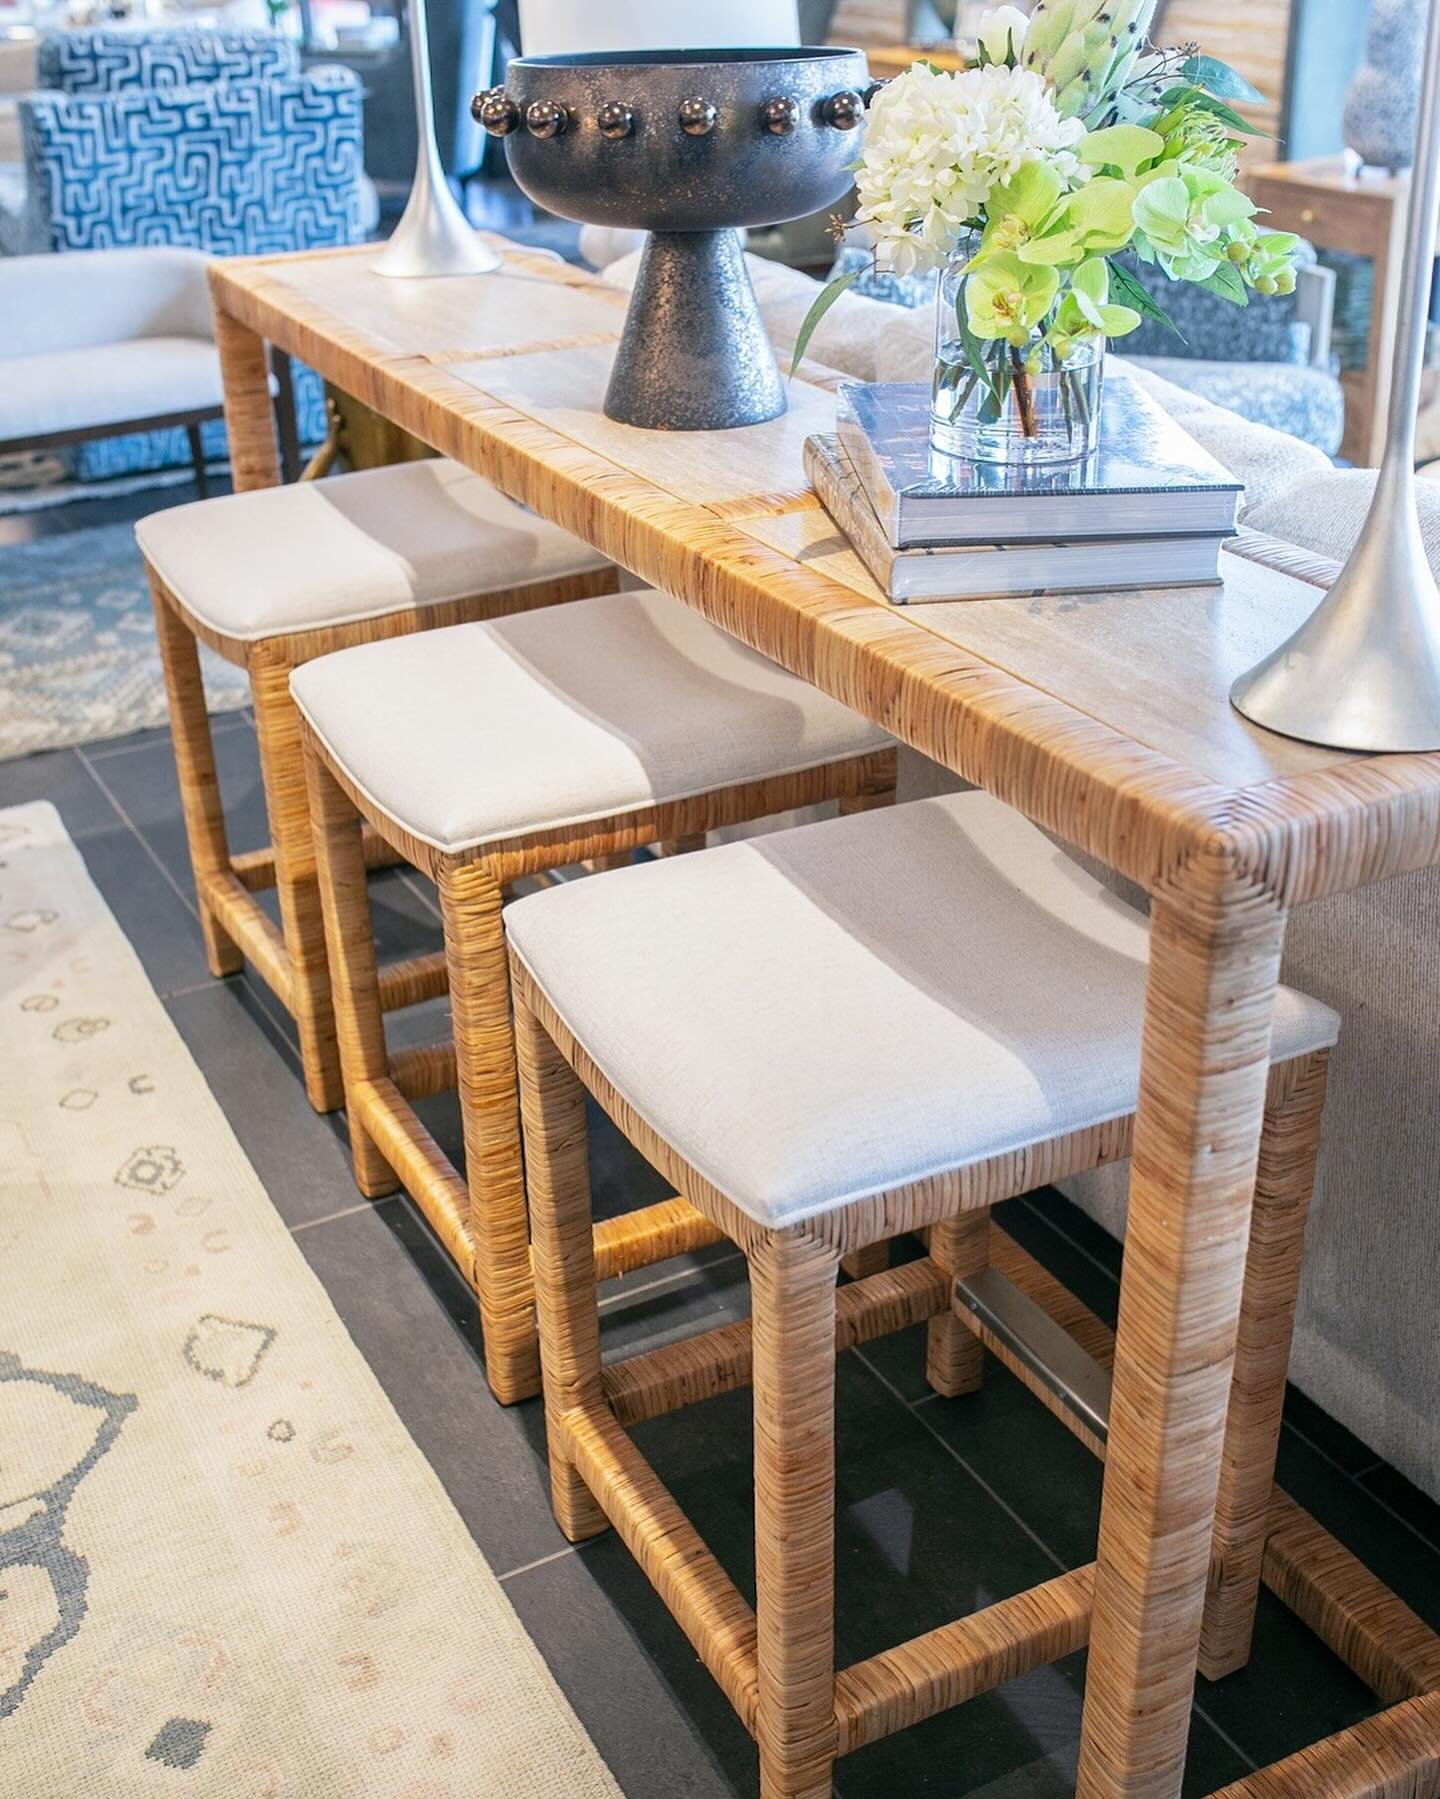 Bring a bit of the beach to your home with this rattan console featuring inset honed Becagli stones and three ivory upholstered stools. #CoastalVibes #ExtraSeatingForSummer #HenryHomeInteriors